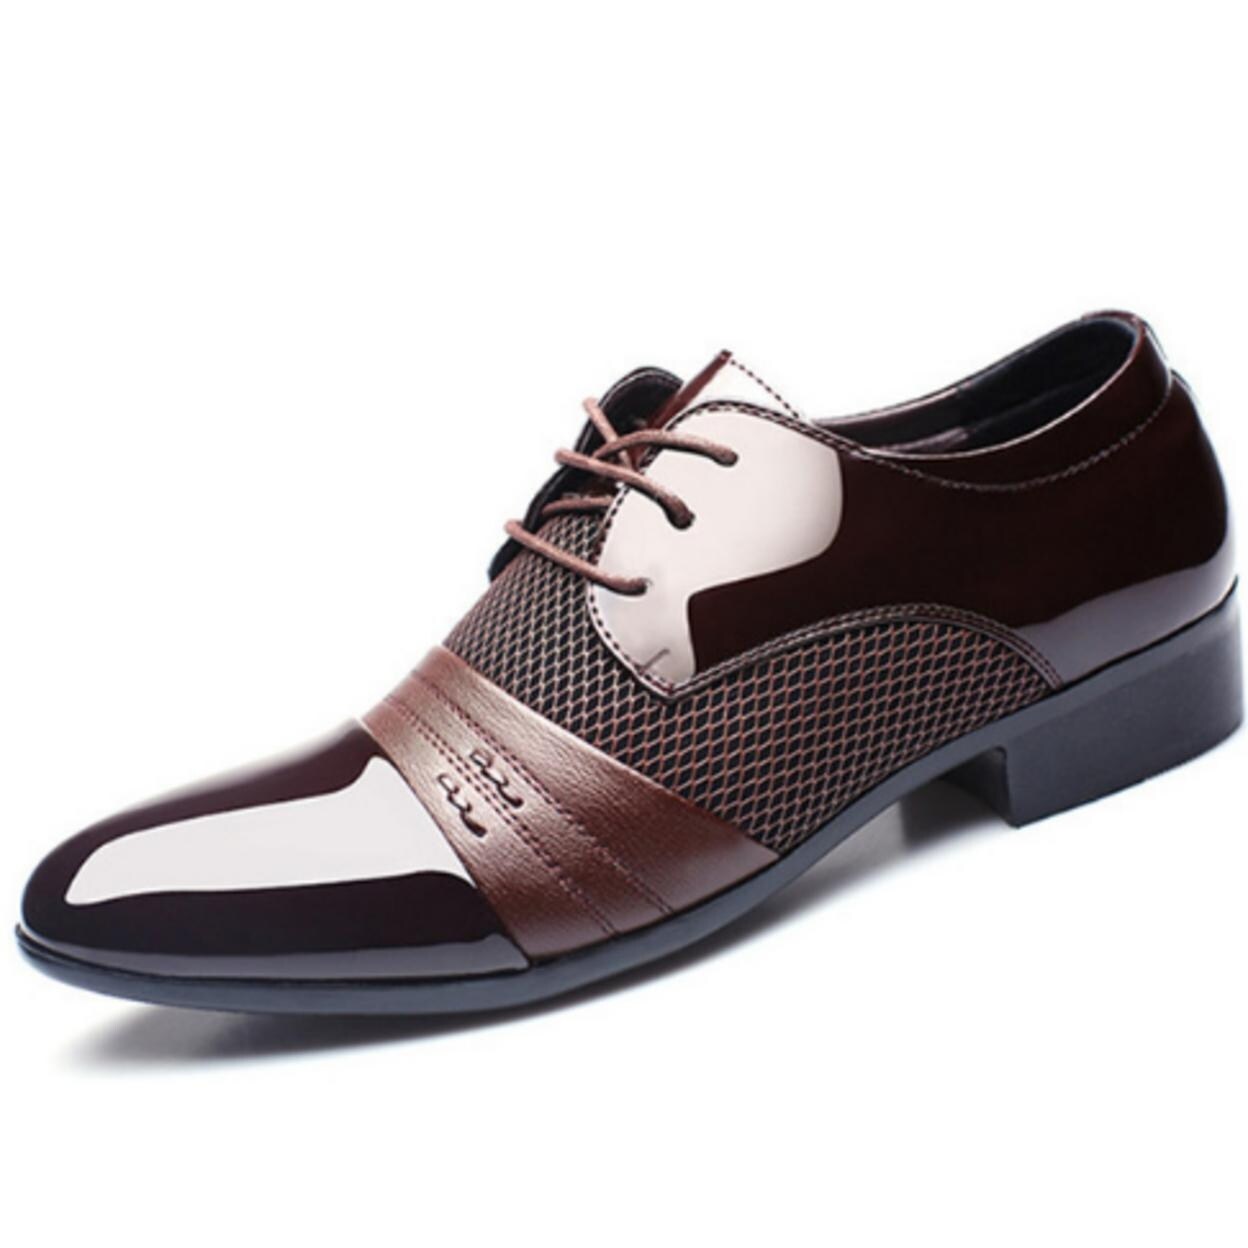 breathable dress shoes